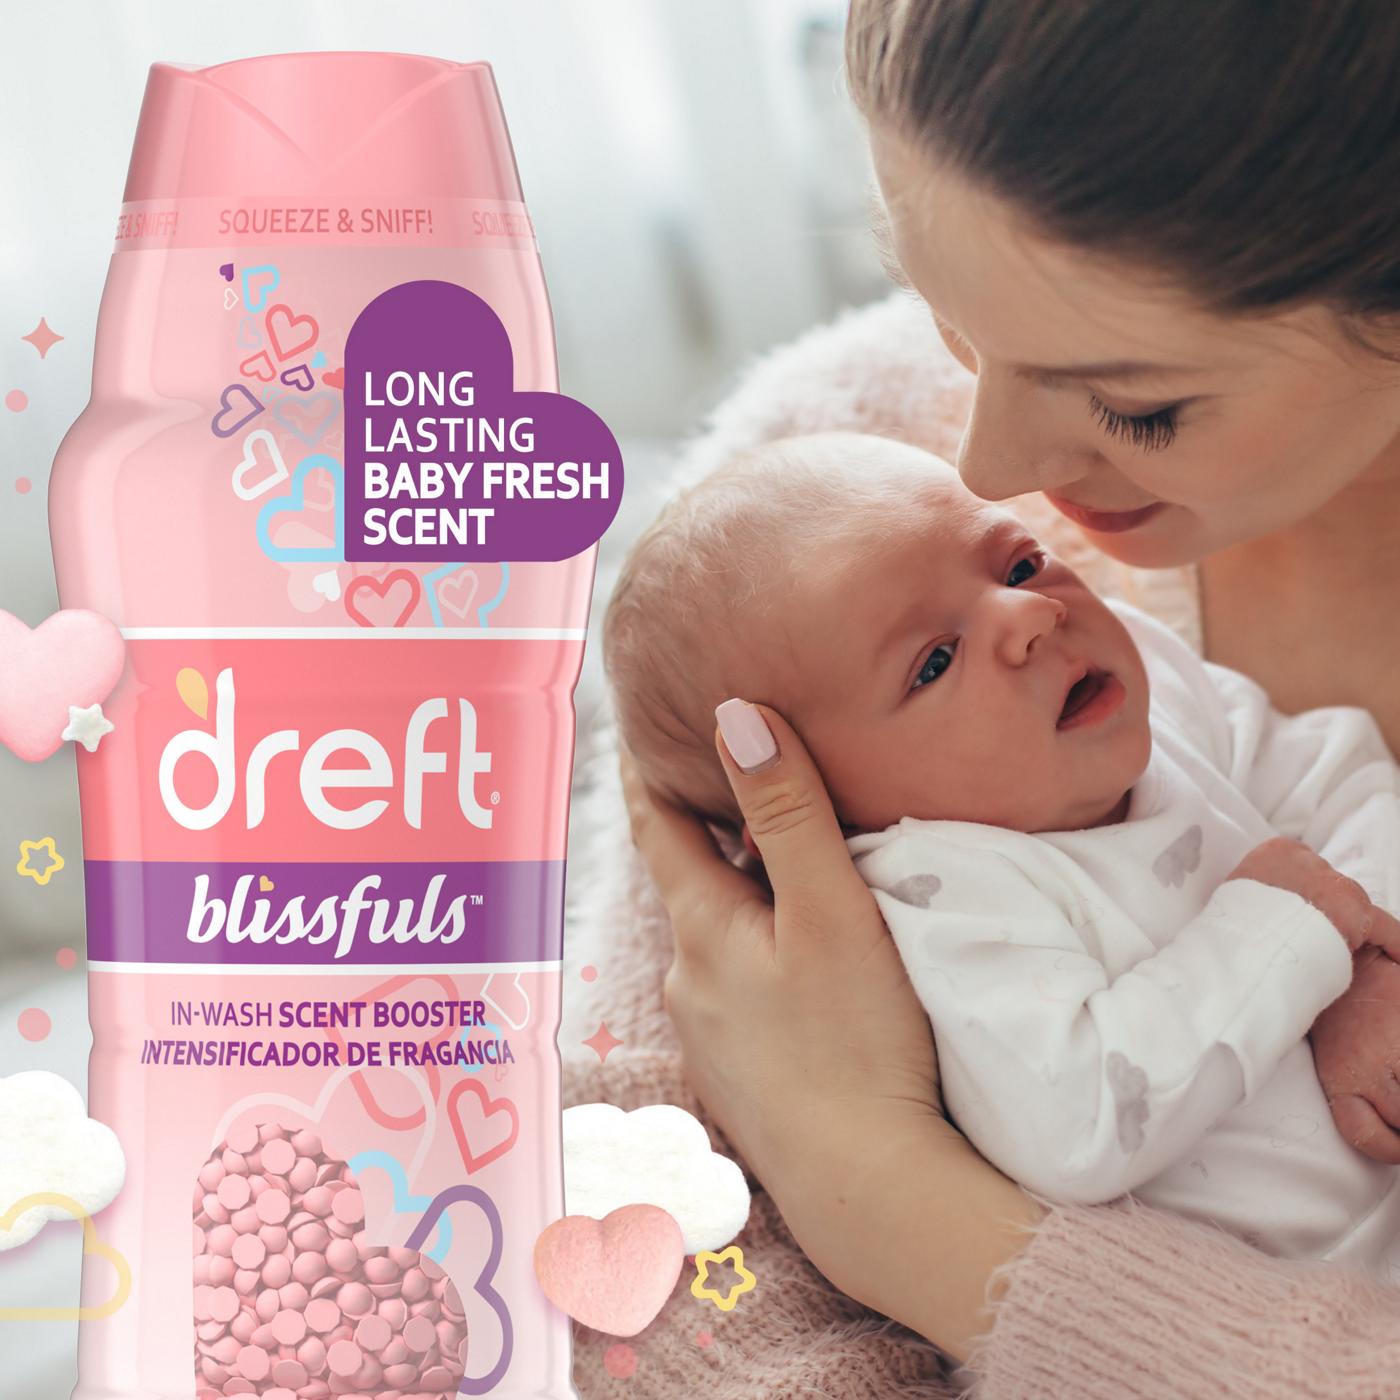 Dreft Blissfuls Baby Fresh In-Wash Scent Booster; image 2 of 4